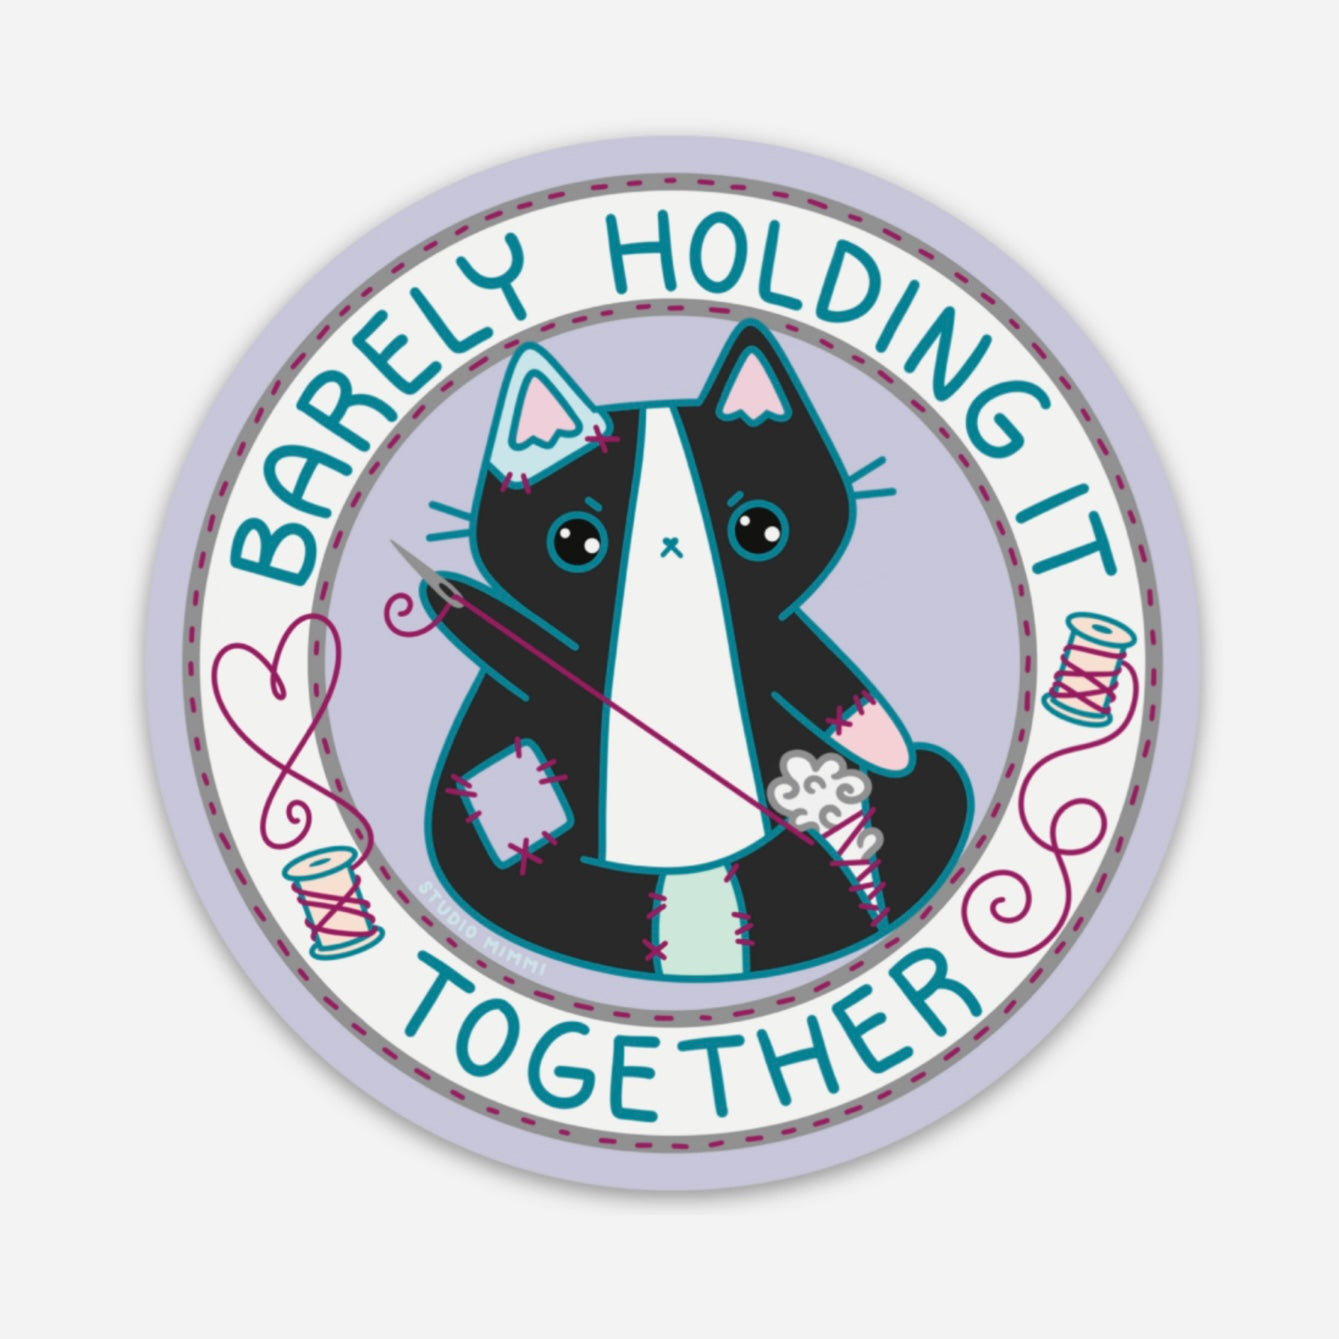 “Barely Holding It Together” Stitched Cat Vinyl Sticker